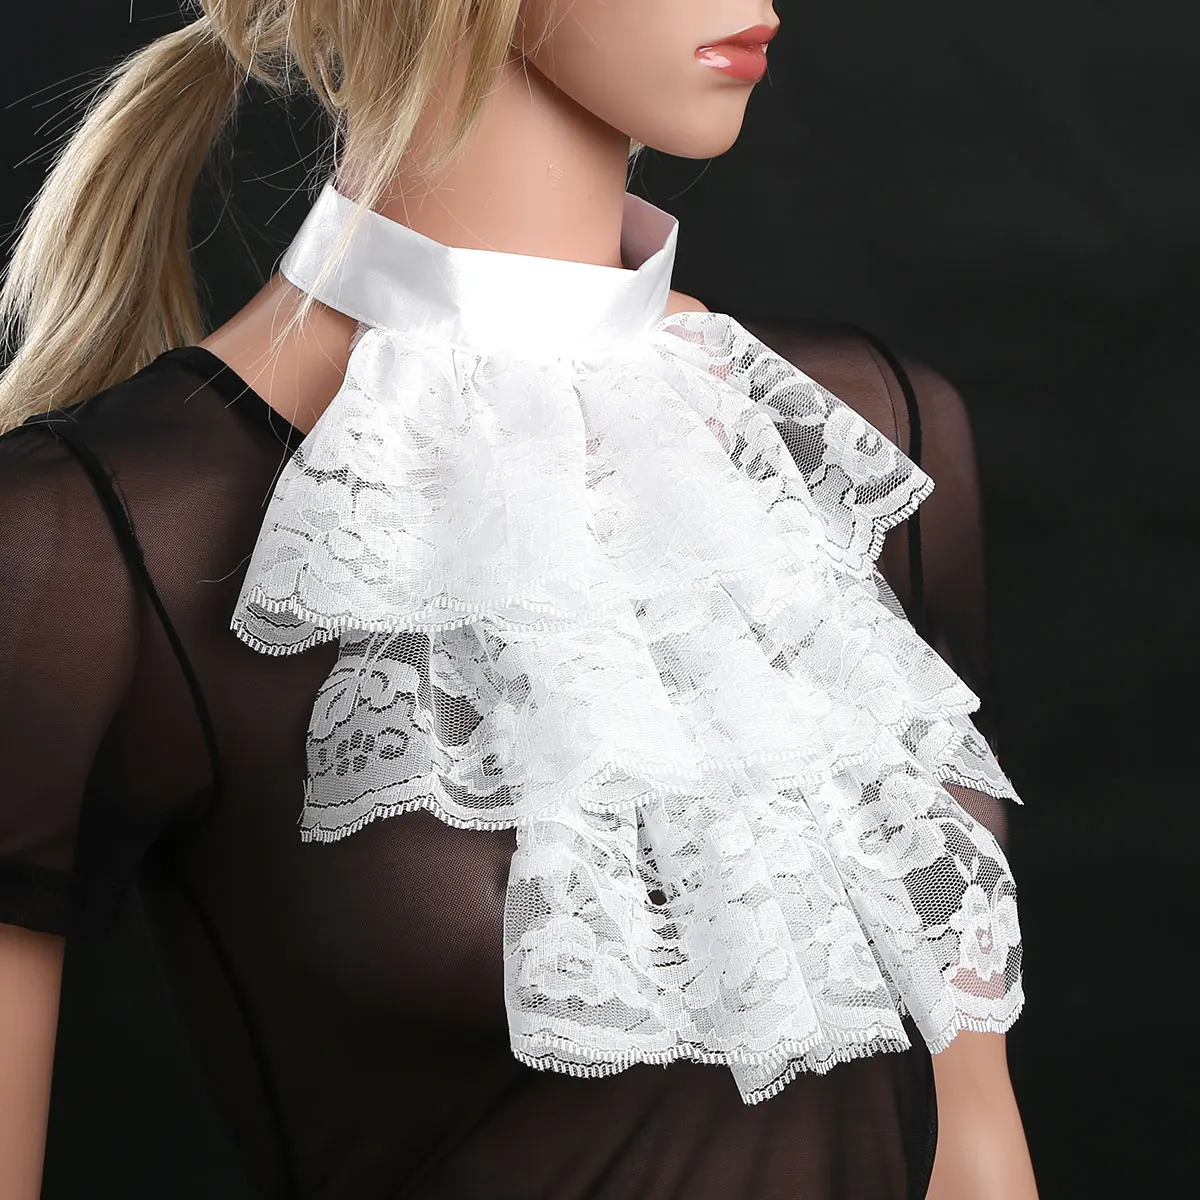 

Fake Collar Women detachable collars Victorian Renaissance Ruffled Lace Jabot Neck Collar Stage Party fancy Steampunk Costume